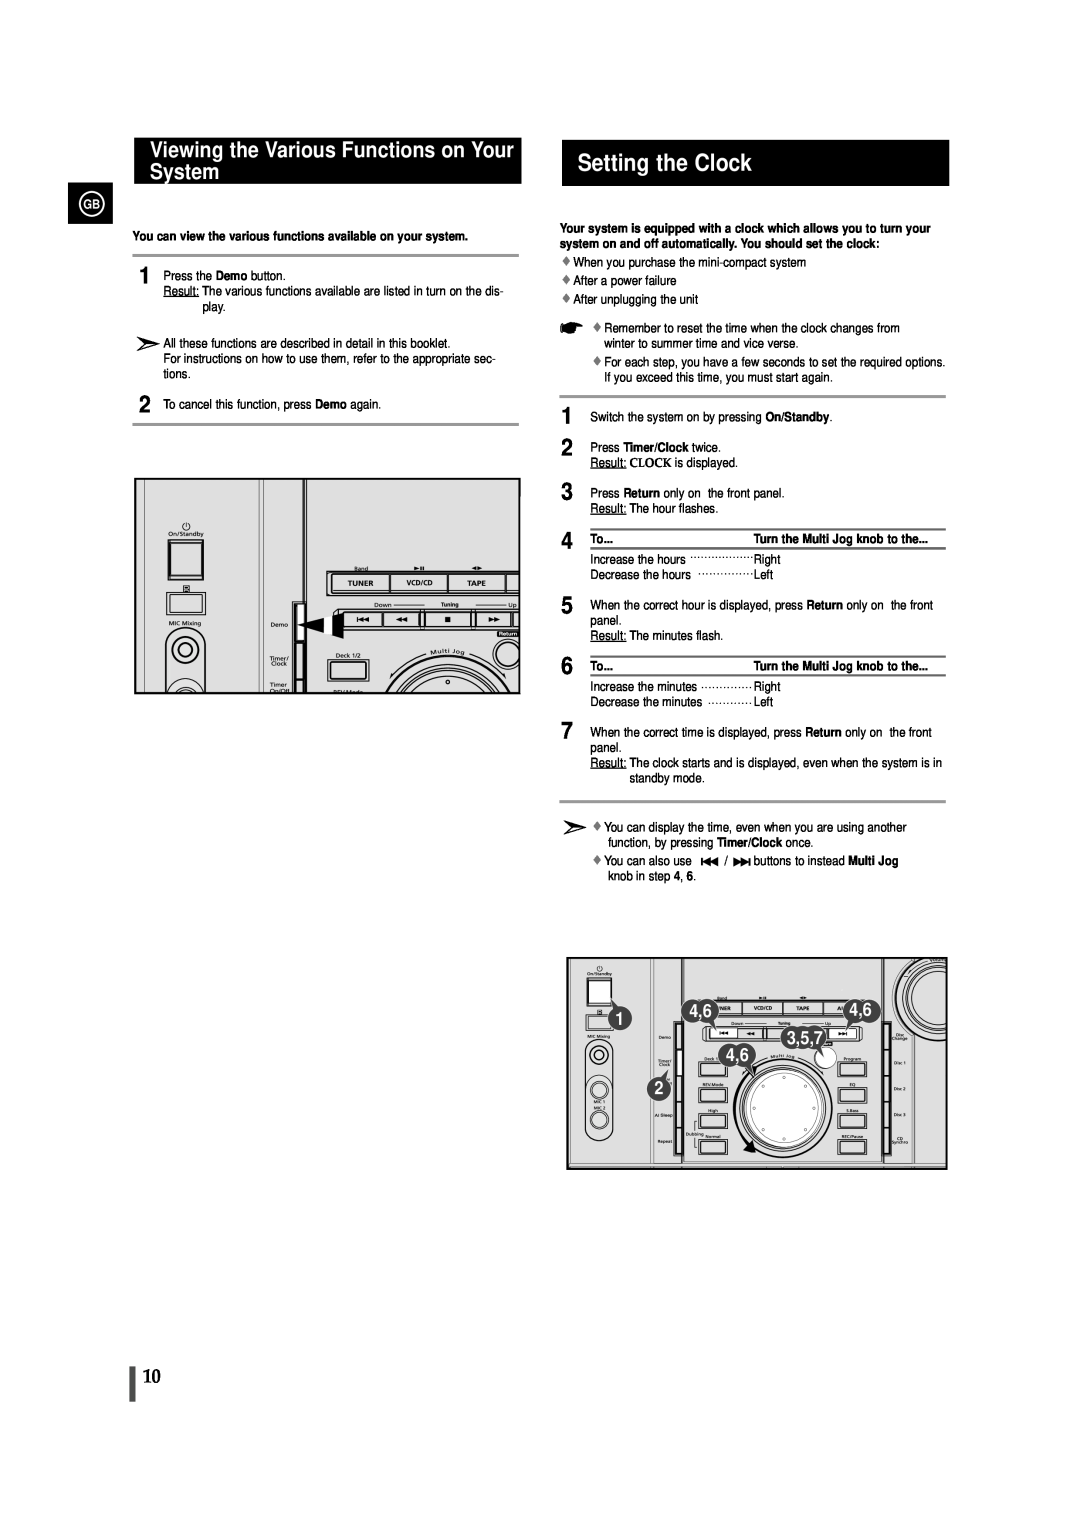 Samsung MAX-VL45, AH68-00935B instruction manual Viewing the Various Functions on Your, System, 3,5,7, Setting the Clock 